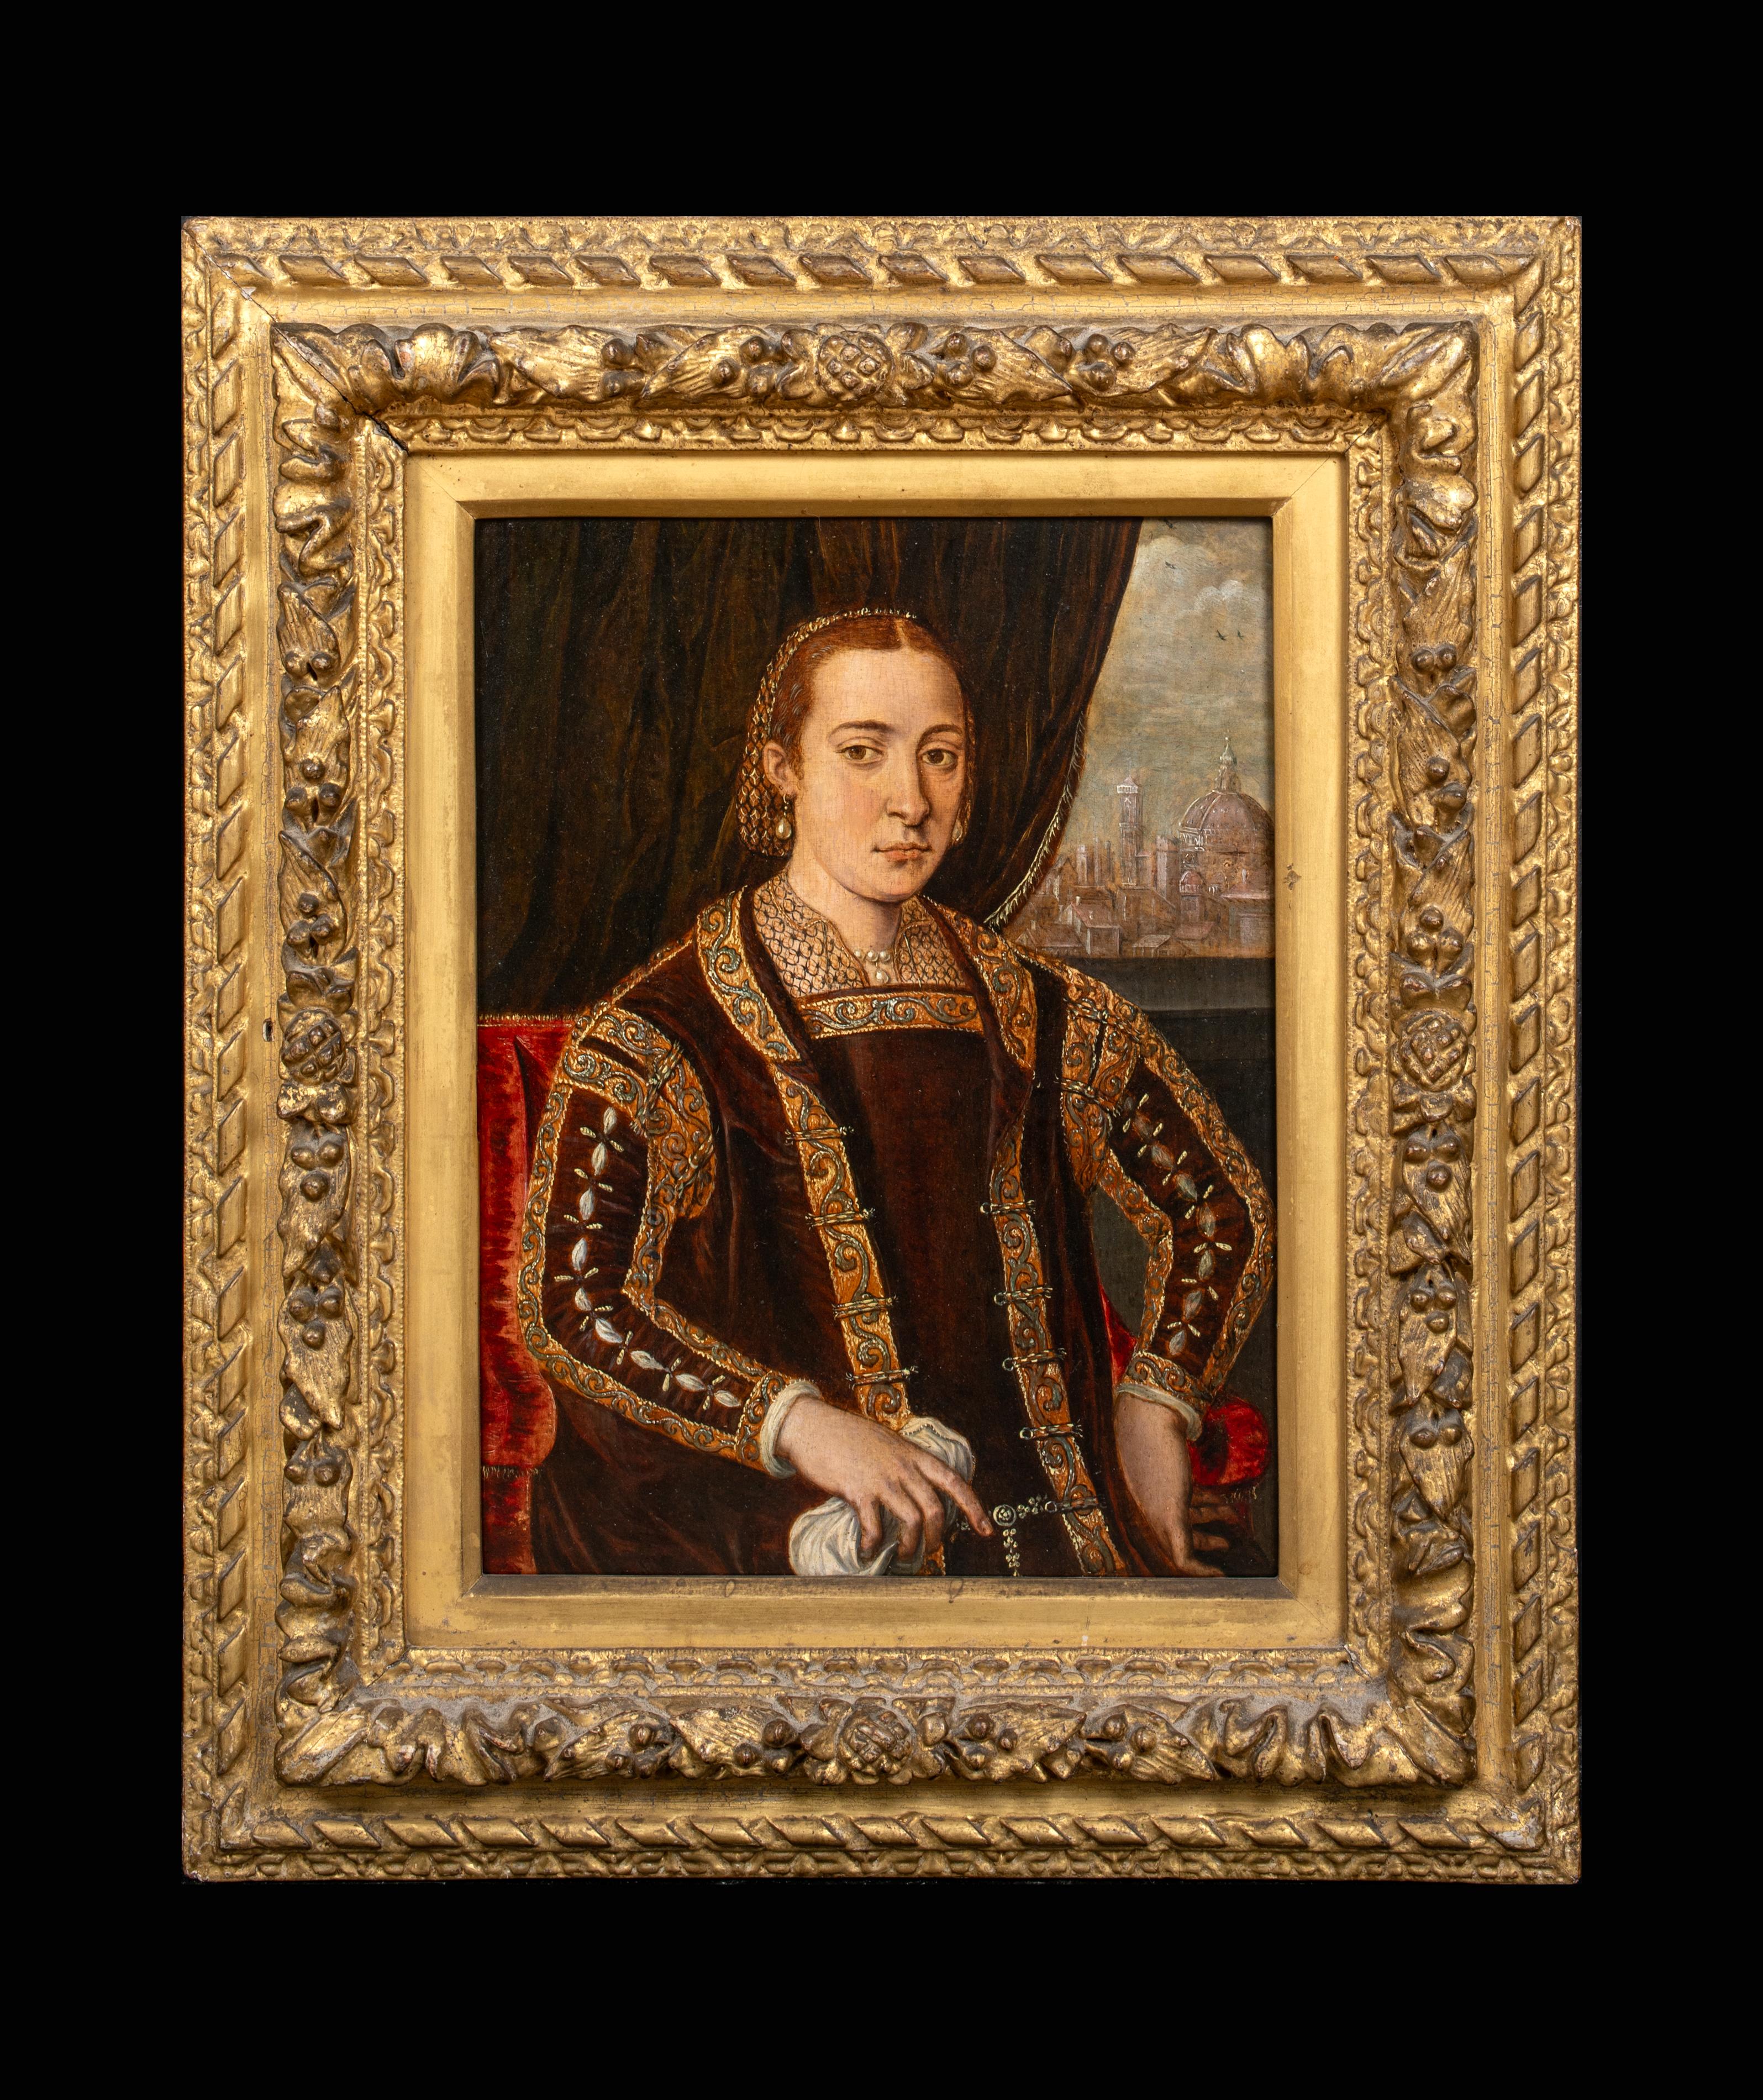 Portrait Of Eleanor Of Toledo, Duchess of Florence (1522-1562), 16th Century 

after AGNOLO BRONZINO (1503-1572)

16th century Italian Old Master court portrait of Eleanor Of Toledo, Duchess of Florence, oil on panel. Excellent quality and condition